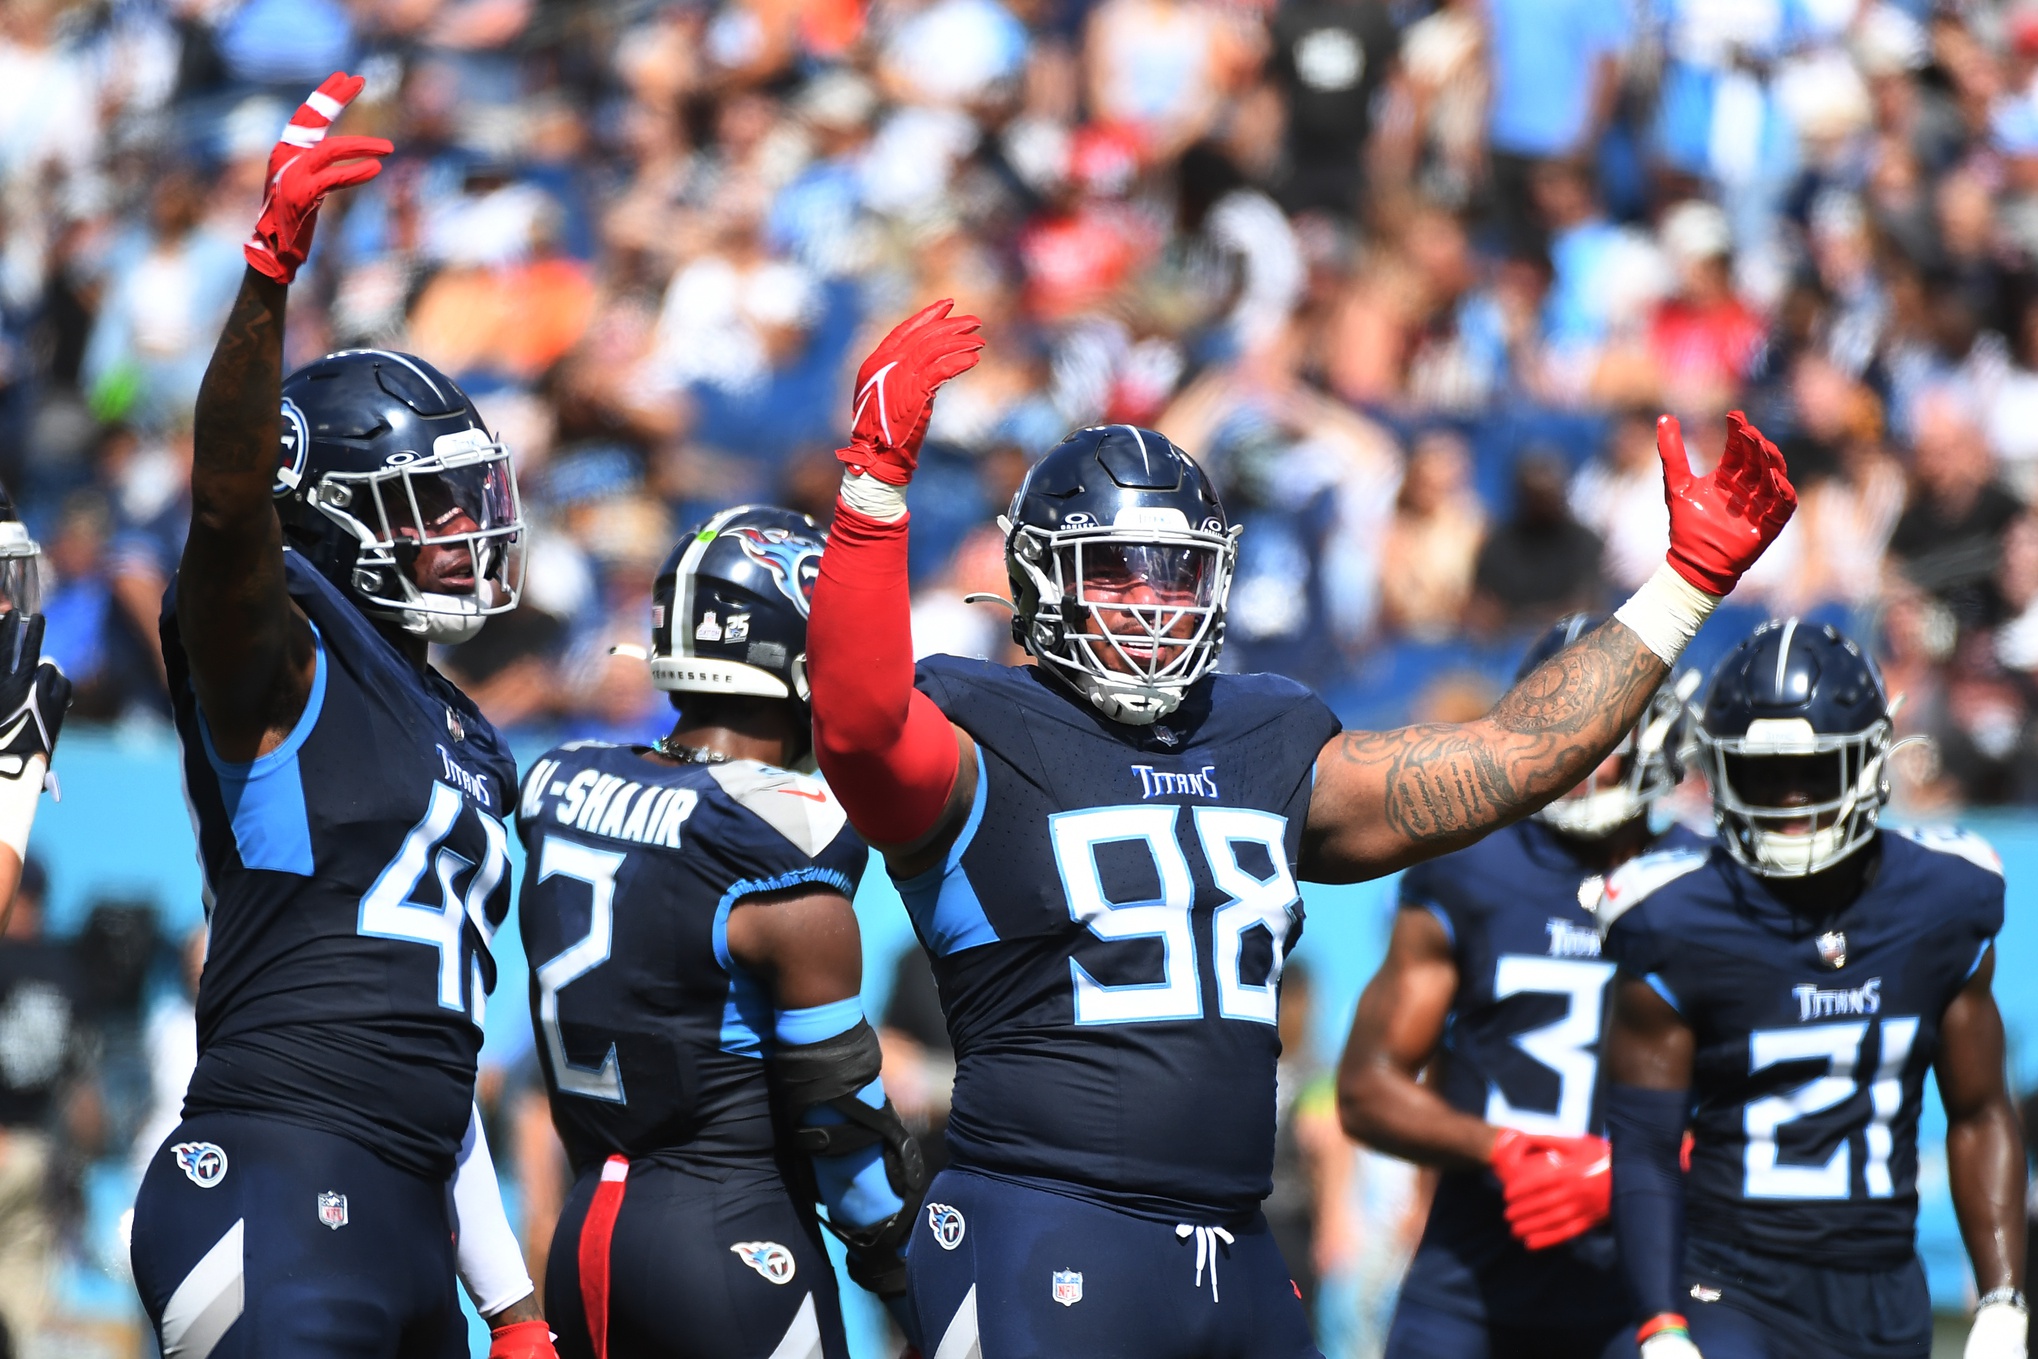 Jeffery Simmons and the Tennessee Titans defense celebrate a stop against the Bengals.